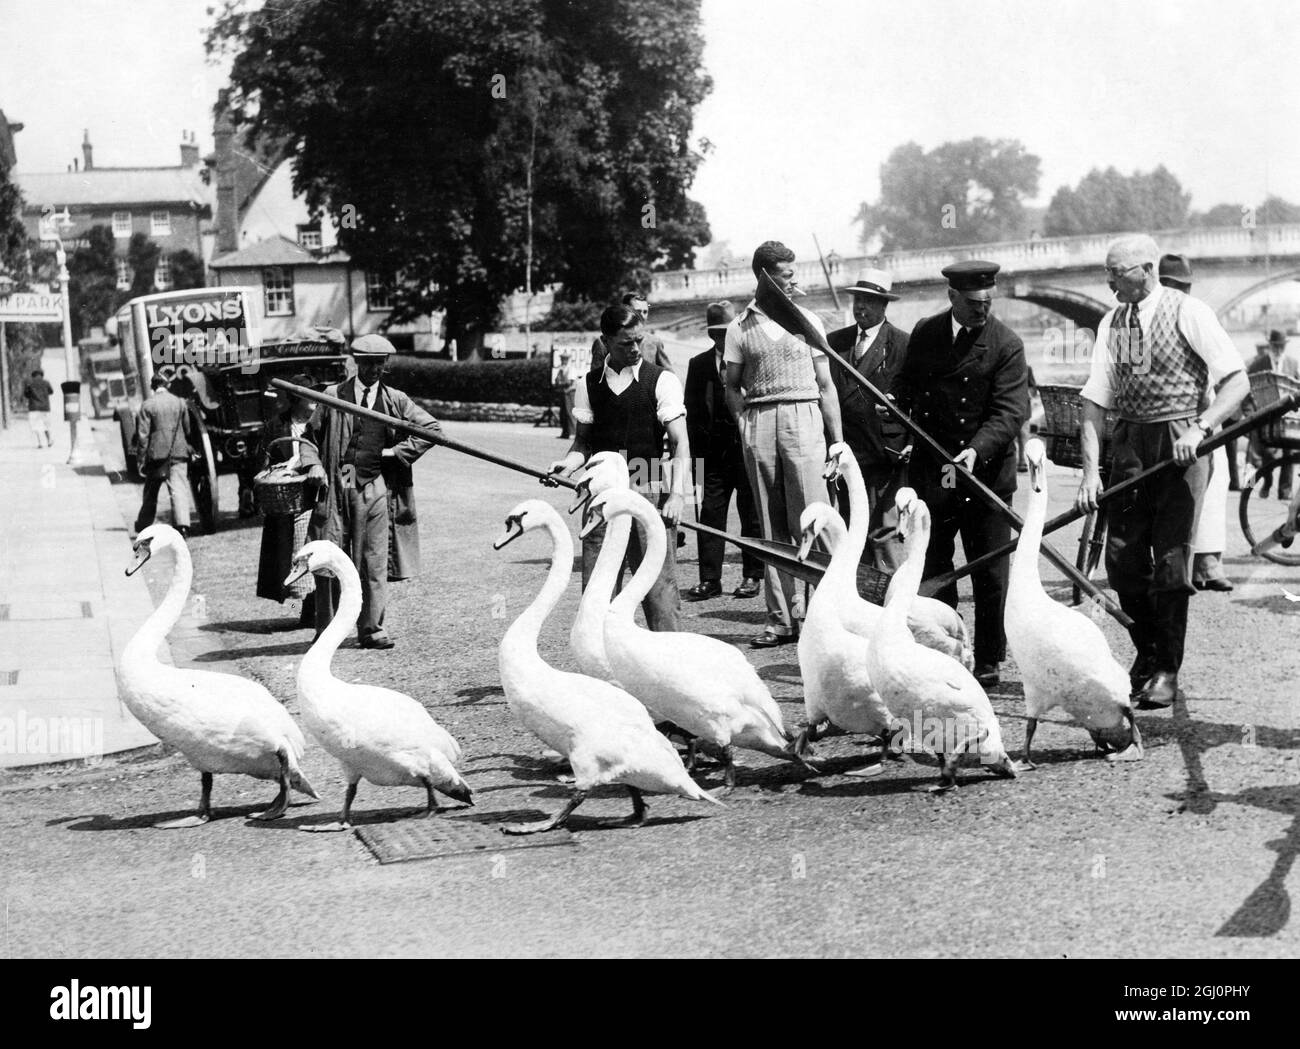 Preparing for Henley Regatta . Swan Masters from the City Companies driving the swans from the regatta course to their temporary quarters during the Henley Regatta June 1937 Henley-on-Thames , Oxfordshire Stock Photo